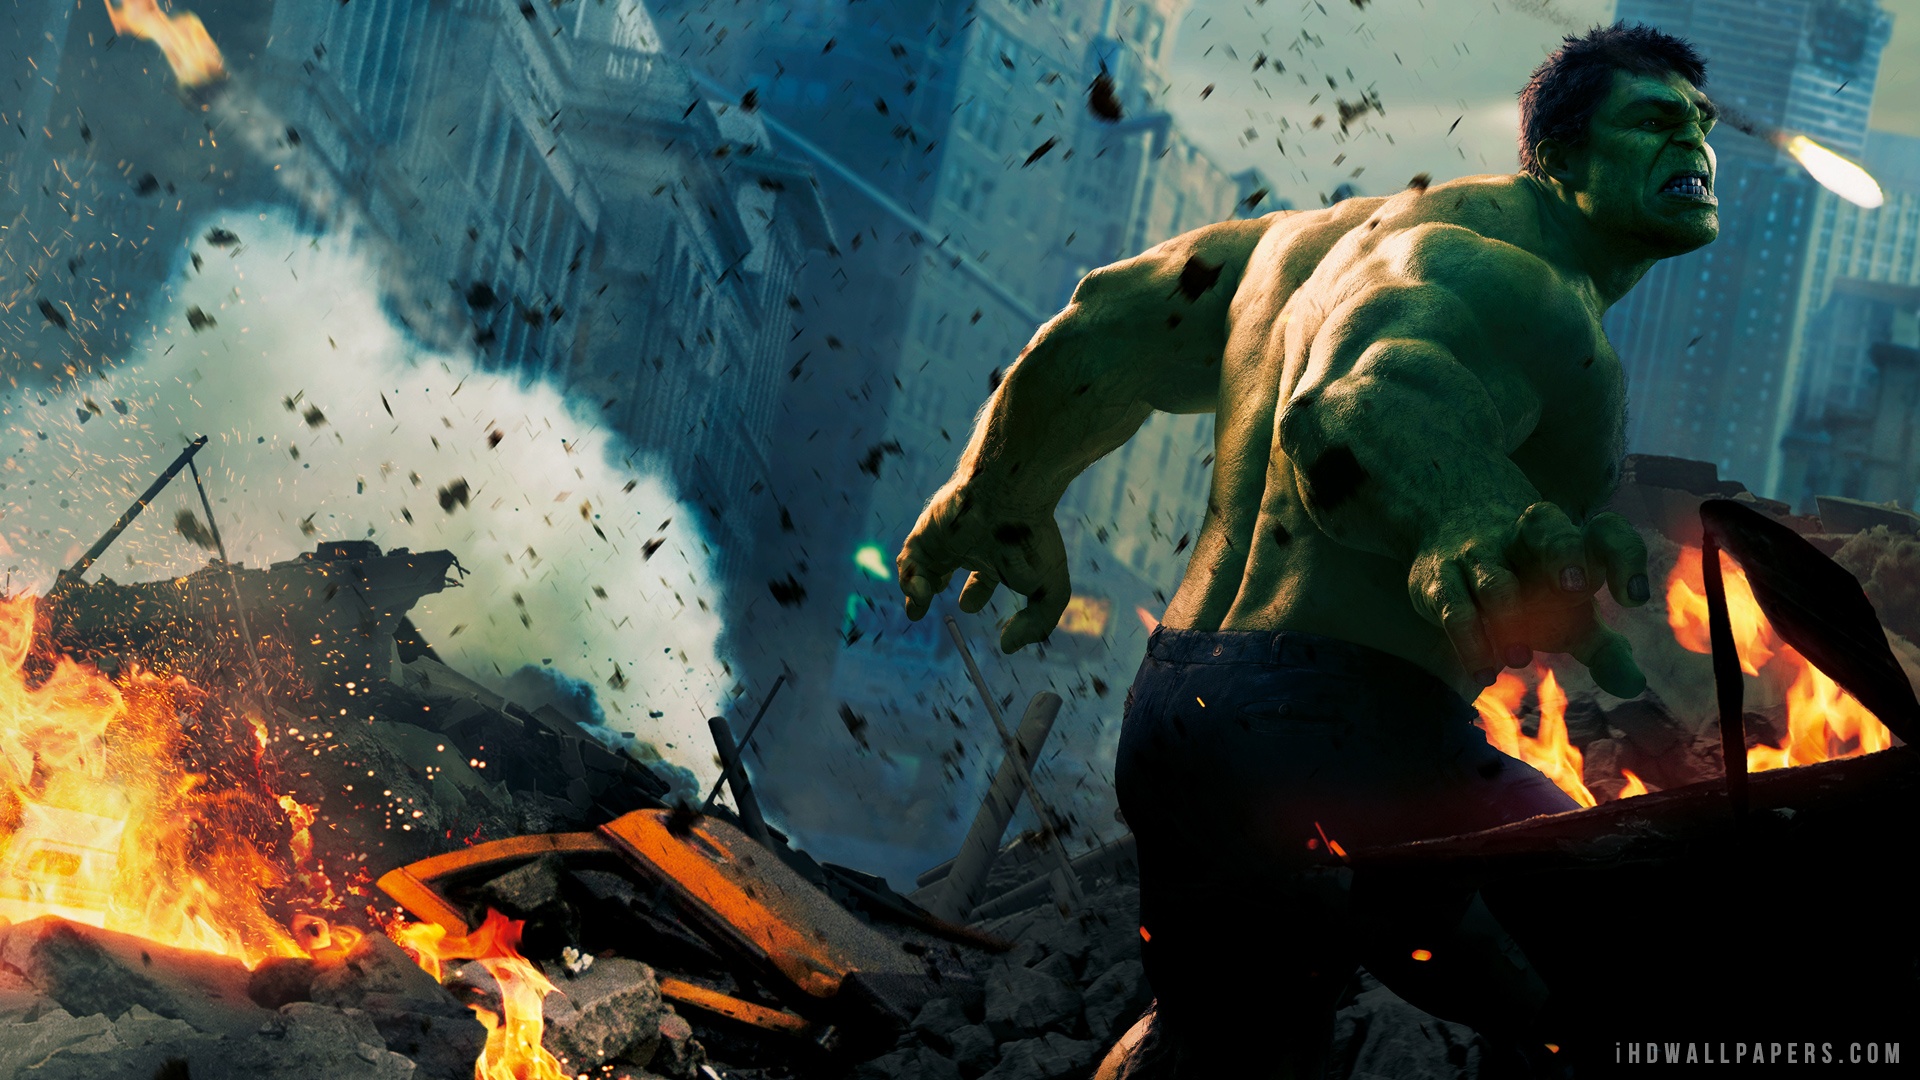 Get Geous Hulk Action Avengers Wallpaper Background In X HD